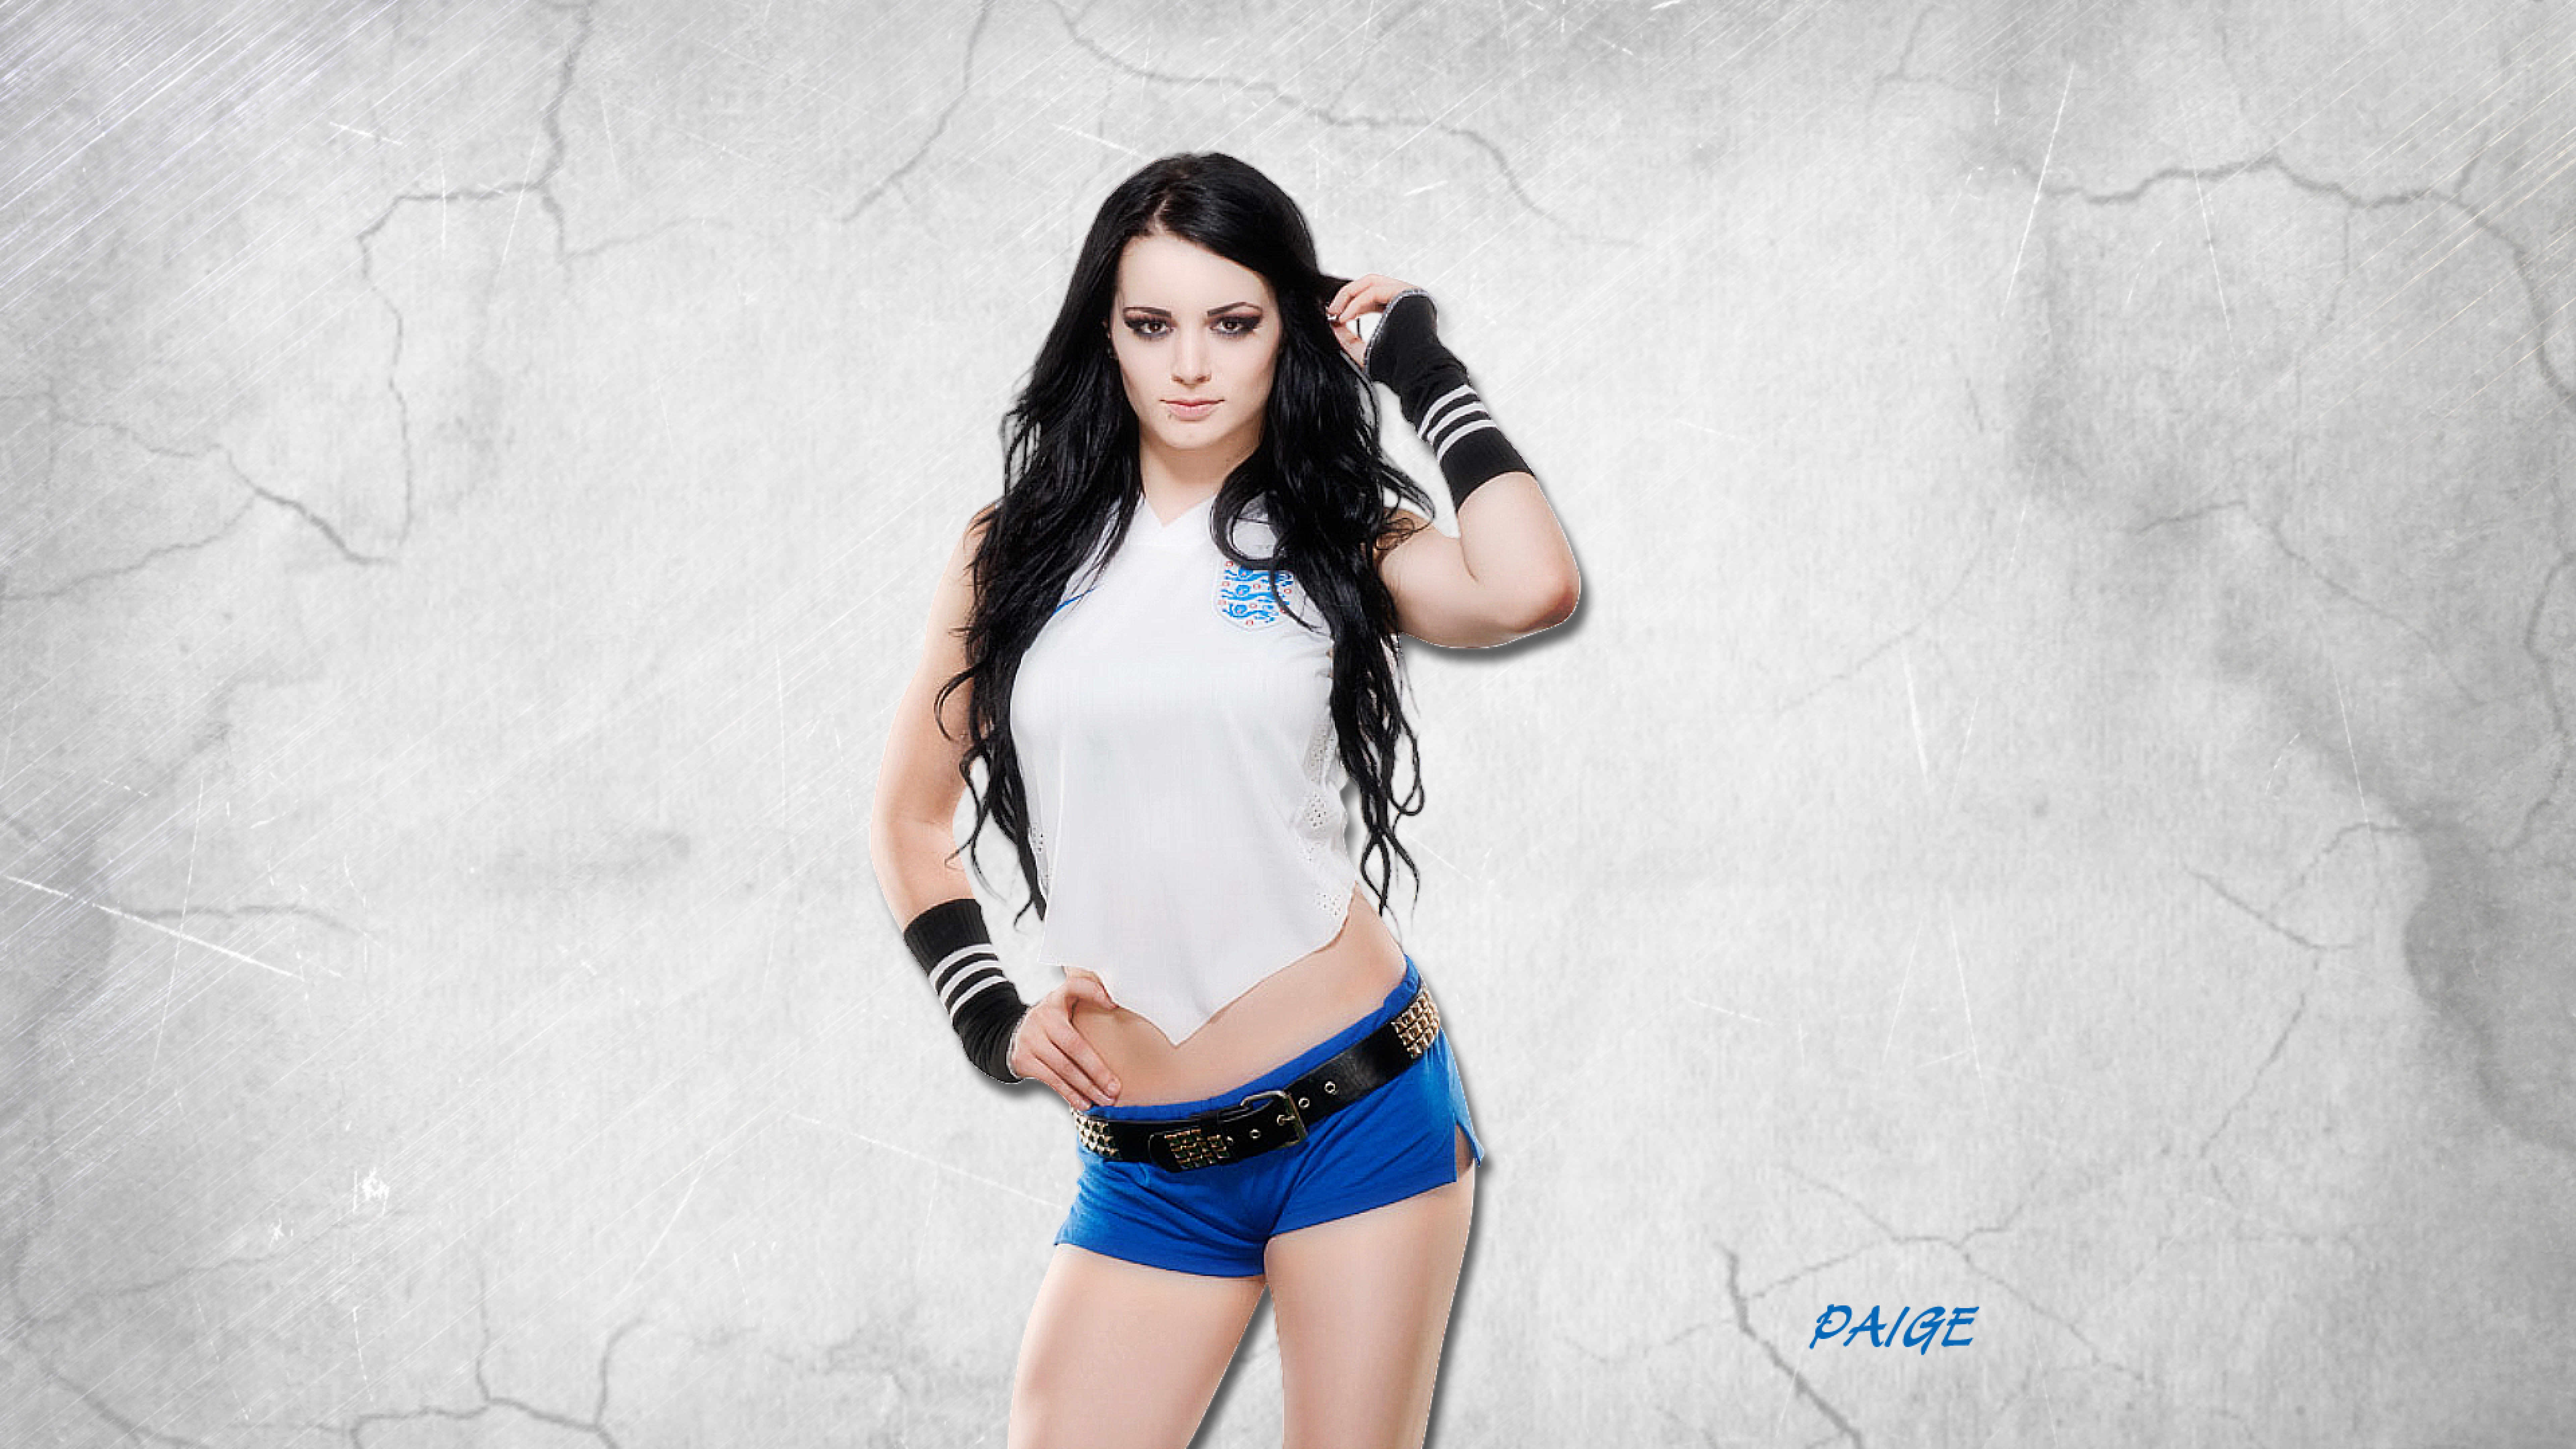 Wwe Paige 4k Wallpapers